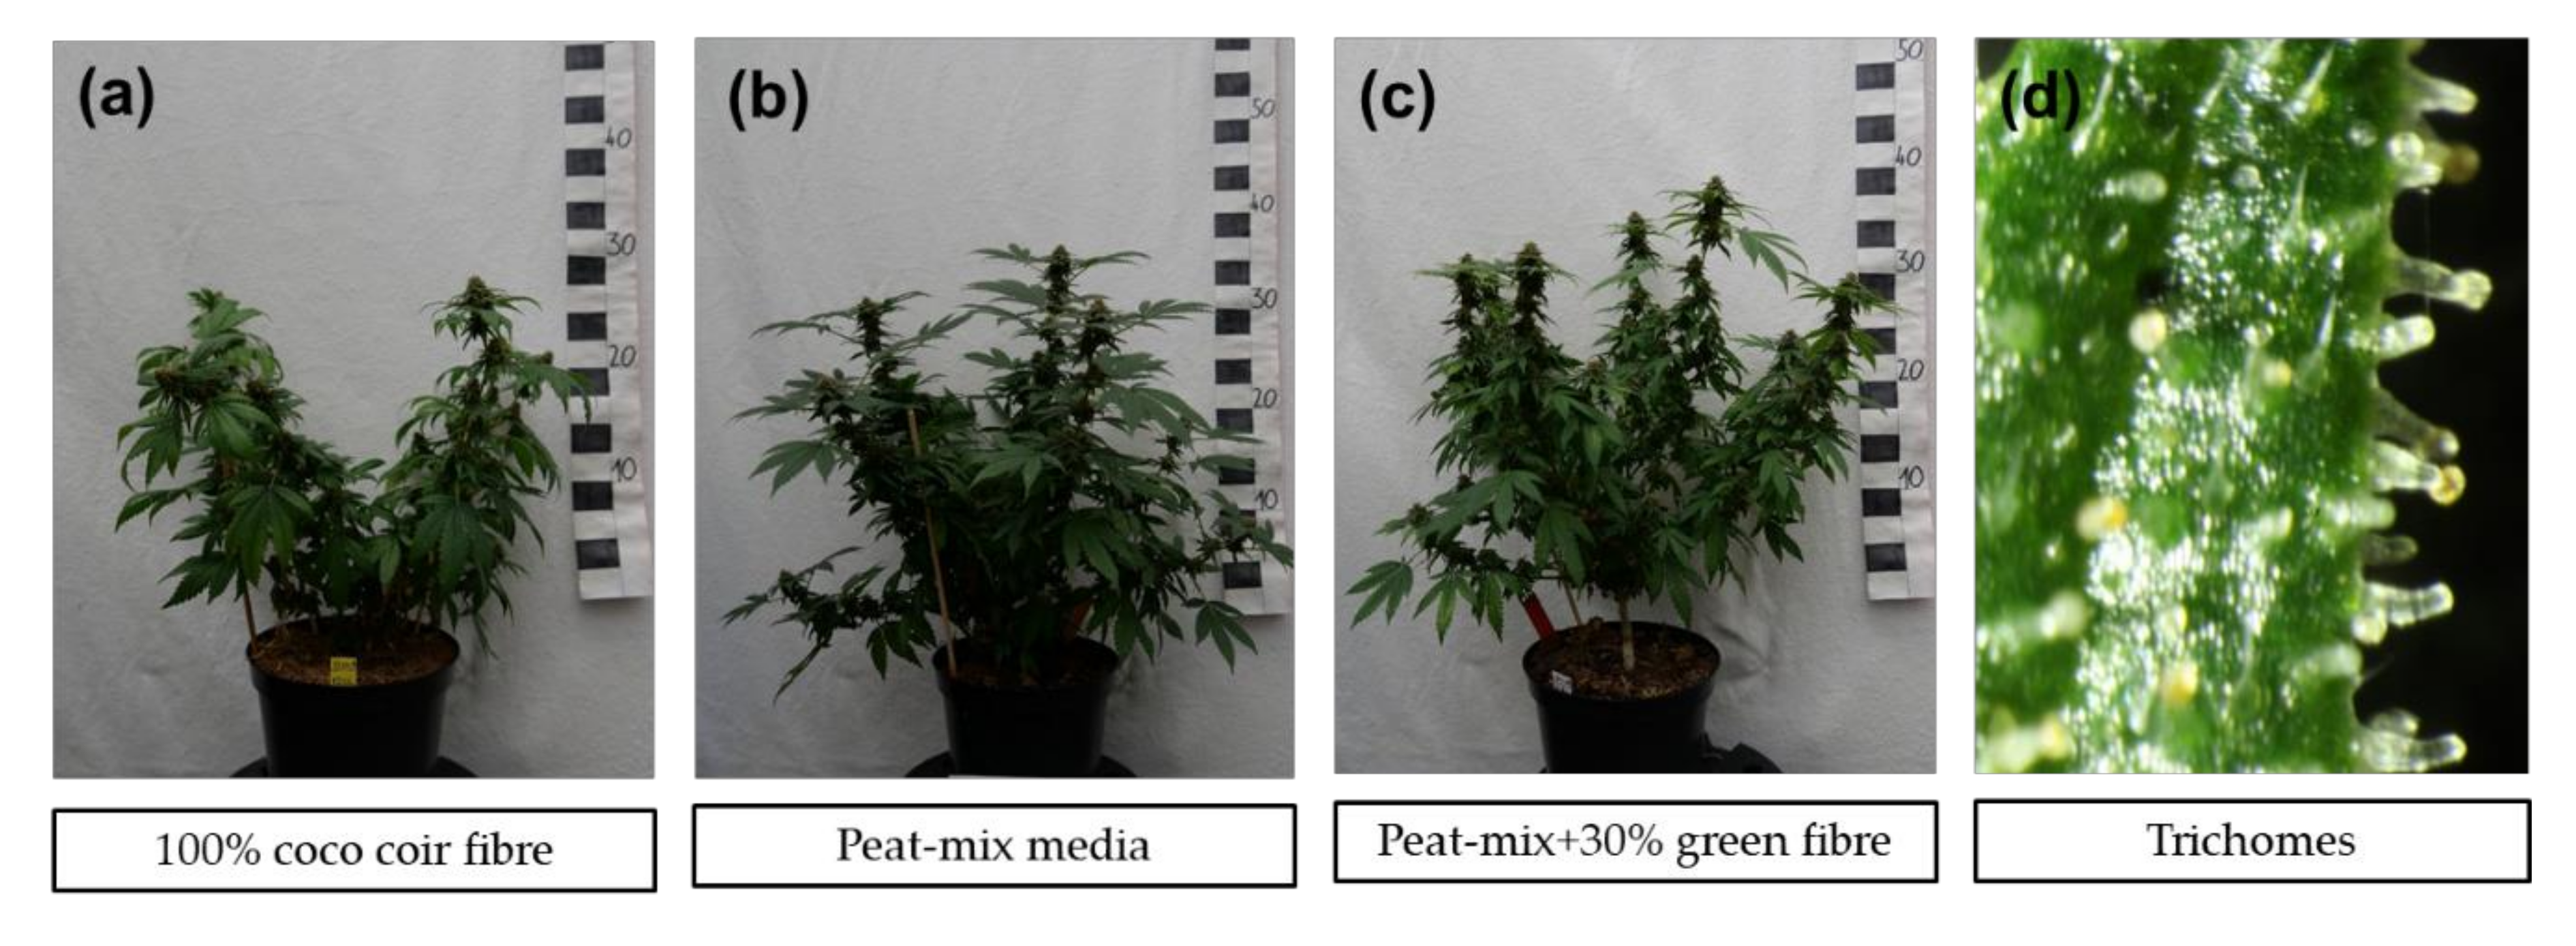 Horticulturae Free Full Text Impact Of Different Growing Substrates On Growth Yield And Cannabinoid Content Of Two Cannabis Sativa L Genotypes In A Pot Culture Html